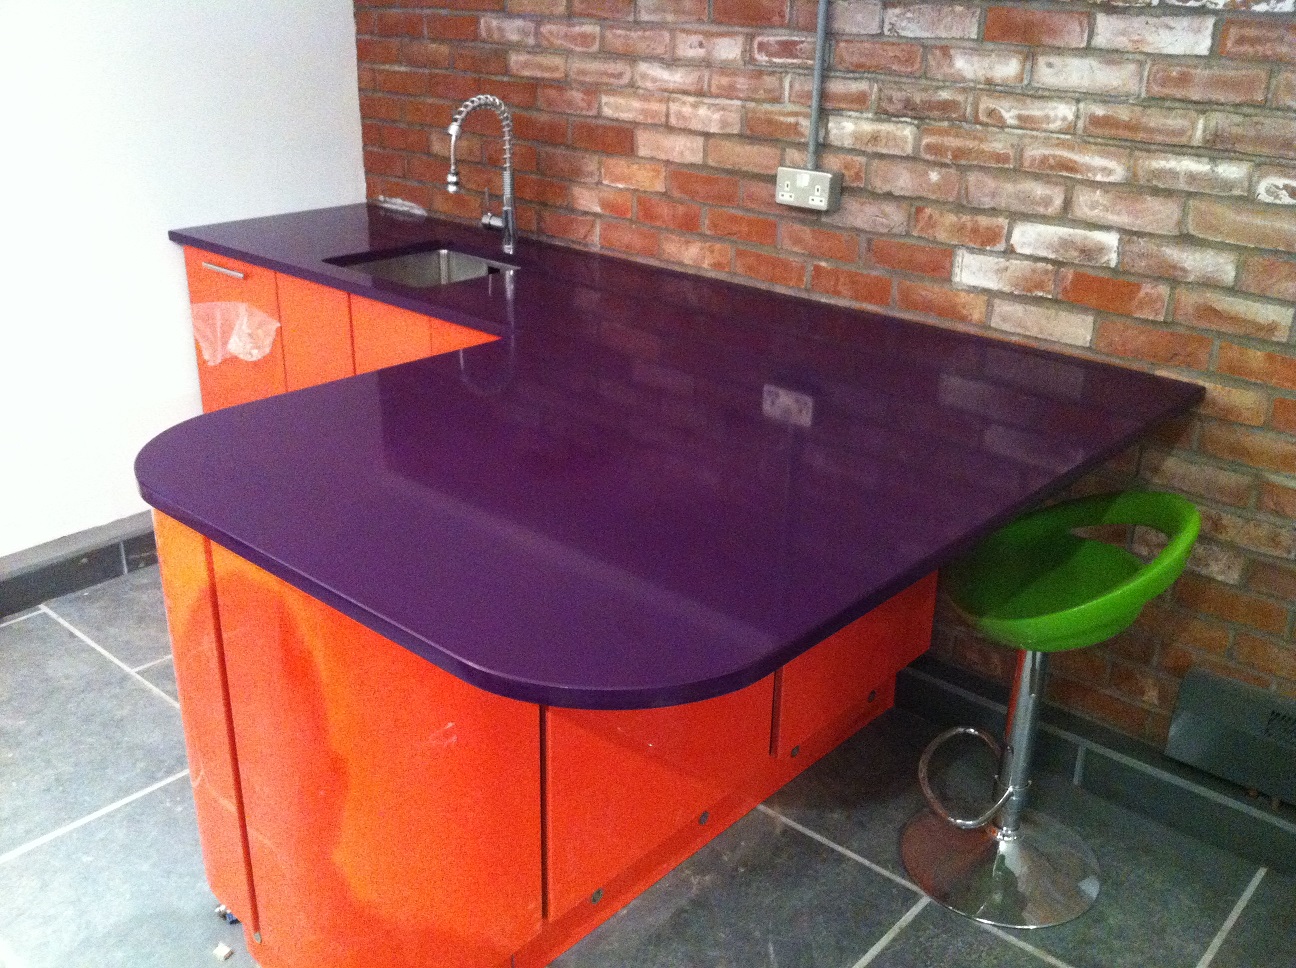 We supply Granite and Quartz Worktops in the sheffield Area. We supply Granite and Quartz Worktops in the Rotherham Area. We supply Granite and Quartz Worktops in the Dronfield Area. We supply Granite and Quartz Worktops in the Chesterfield Area. We supply Granite and Quartz Worktops in the Darnall Area. We supply Granite and Quartz Worktops in the Chapeltown Area. We supply Granite and Quartz Worktops in the Ecclesfield Area. We supply Granite and Quartz Worktops in the Meersbrook Area. We supply Granite and Quartz Worktops in the Woodseats Area. We supply Granite and Quartz Worktops in the Mosborough Area. We supply Granite and Quartz Worktops in the Handsworth Area. We supply Granite and Quartz Worktops in the Hoyland Area. We supply Granite and Quartz Worktops in the Dinnington Area. We supply Granite and Quartz Worktops in the Kilamarsh Area. We supply Granite and Quartz Worktops in the Worksop Area. We supply Granite and Quartz Worktops in the Hathersage Area. We supply Granite and Quartz Worktops in the Eckington Area. We supply Granite and Quartz Worktops in the Spinkhill Area. We supply Granite and Quartz Worktops in the Barnsley Area. We supply Granite and Quartz Worktops in the Penistone Area. We supply Granite and Quartz Worktops in the town20 Area.